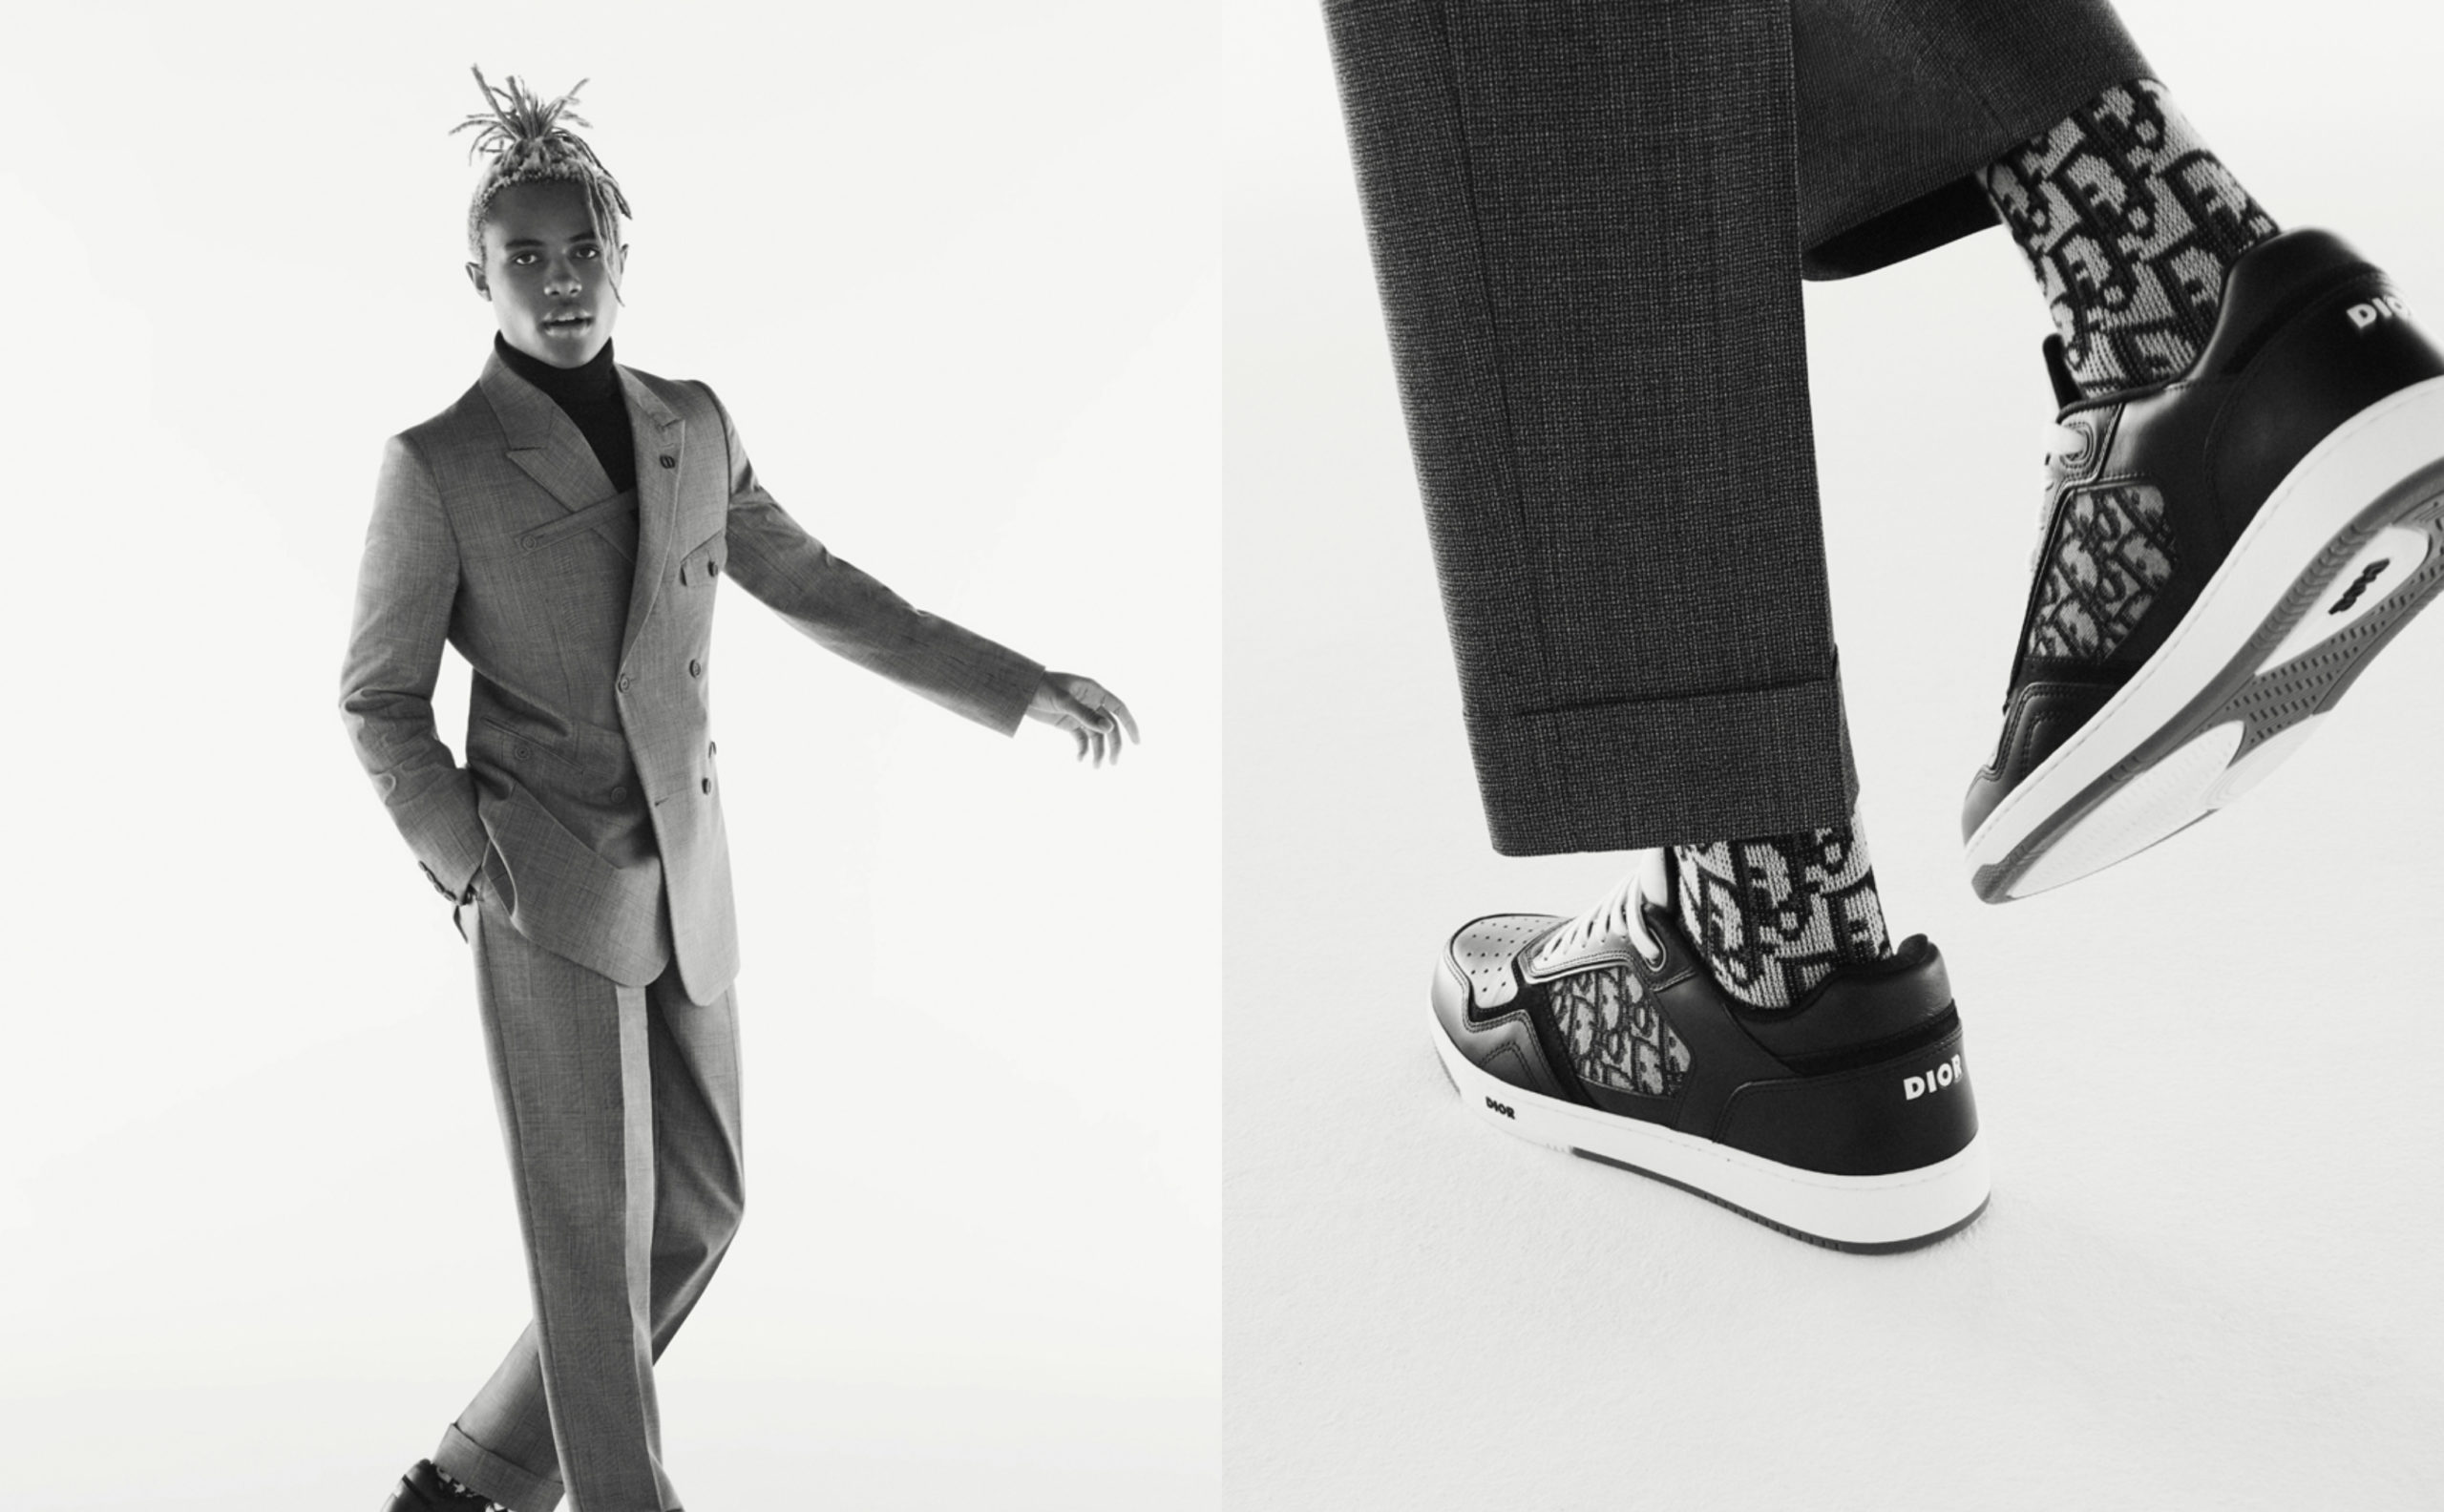 Dior Pair Suits and Sneakers for New Capsule